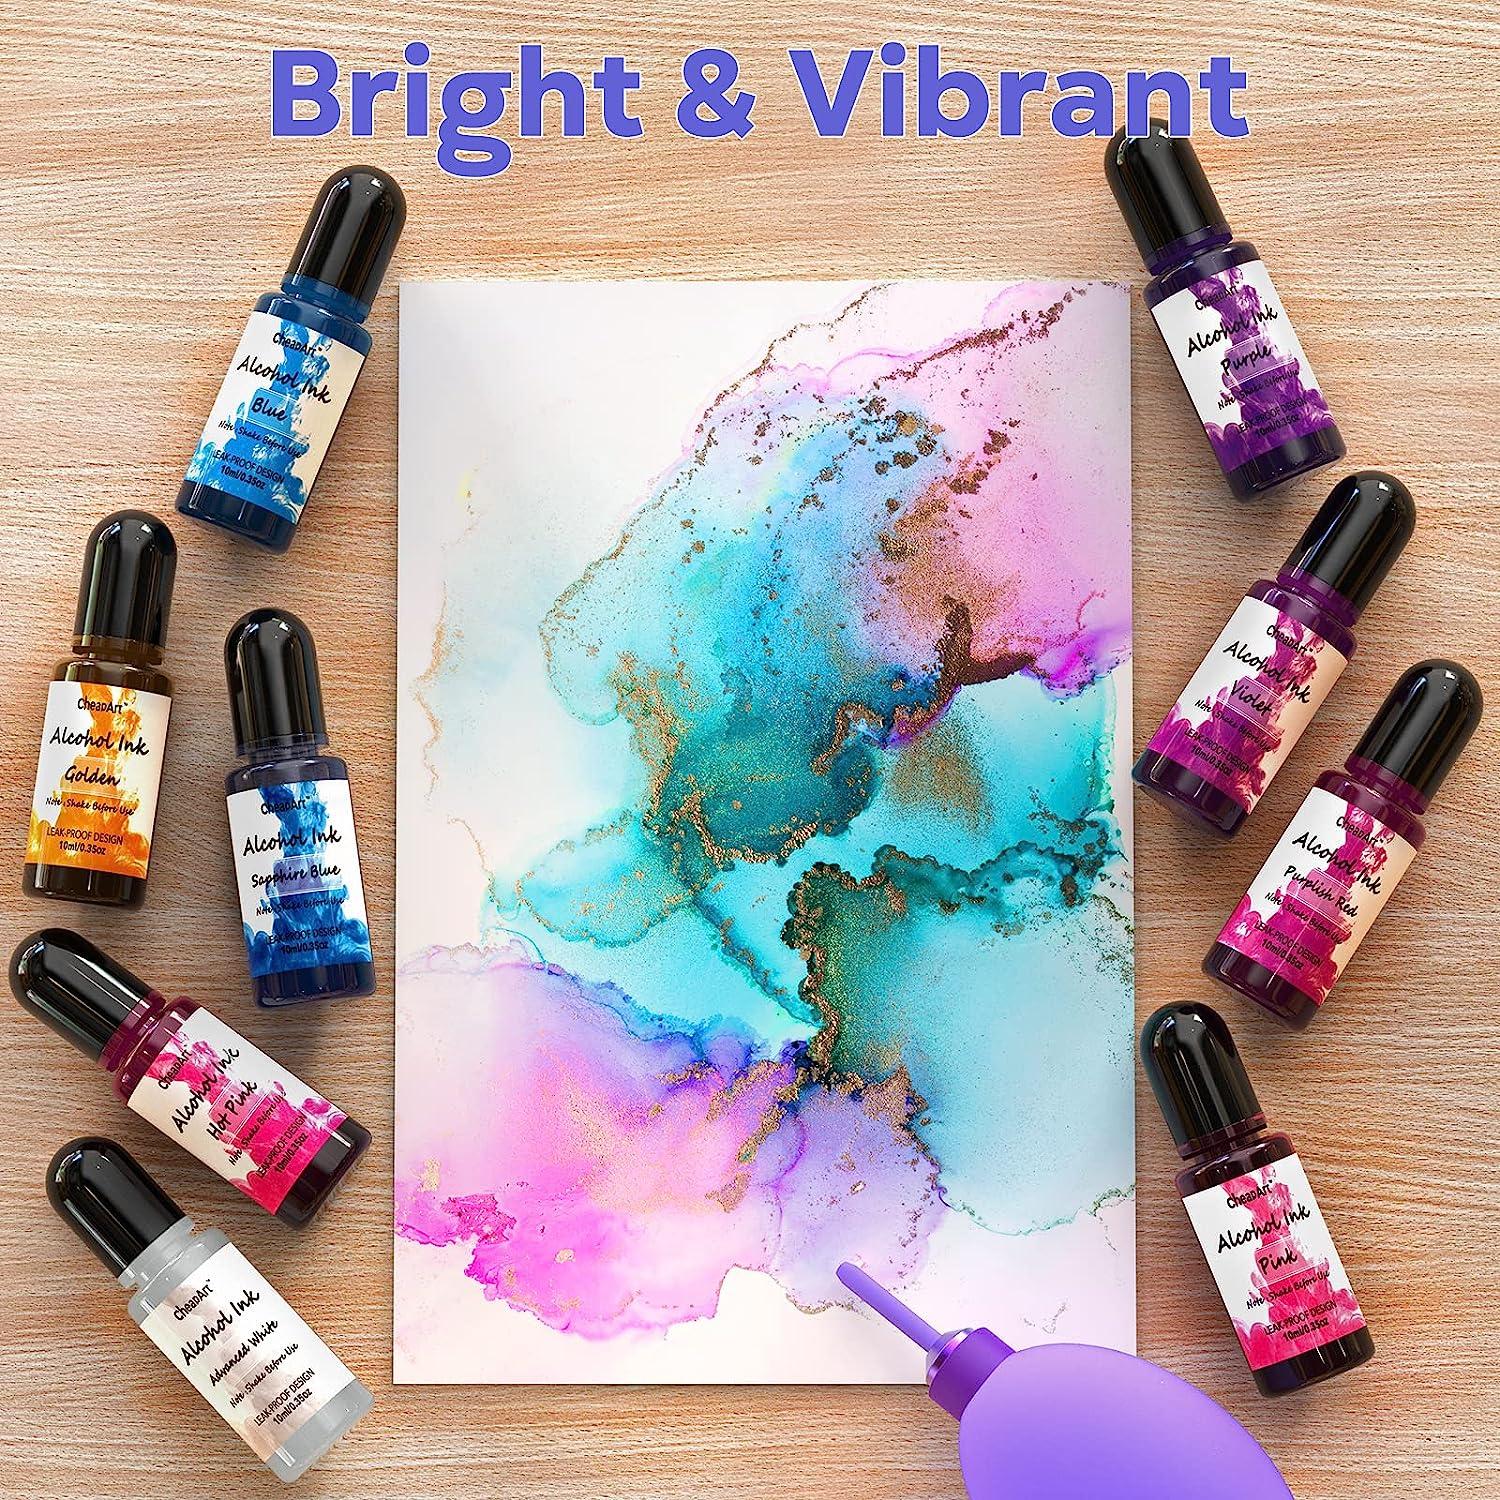 Alcohol Ink for Epoxy Resin - 24 Bottles Alcohol-Based Ink Vibrant Color  High Concentrated Alcohol Paint Pigment Resin Ink for Resin Crafts Tumblers  Acrylic Fluid Art Painting, 10ml/0.35 fl oz